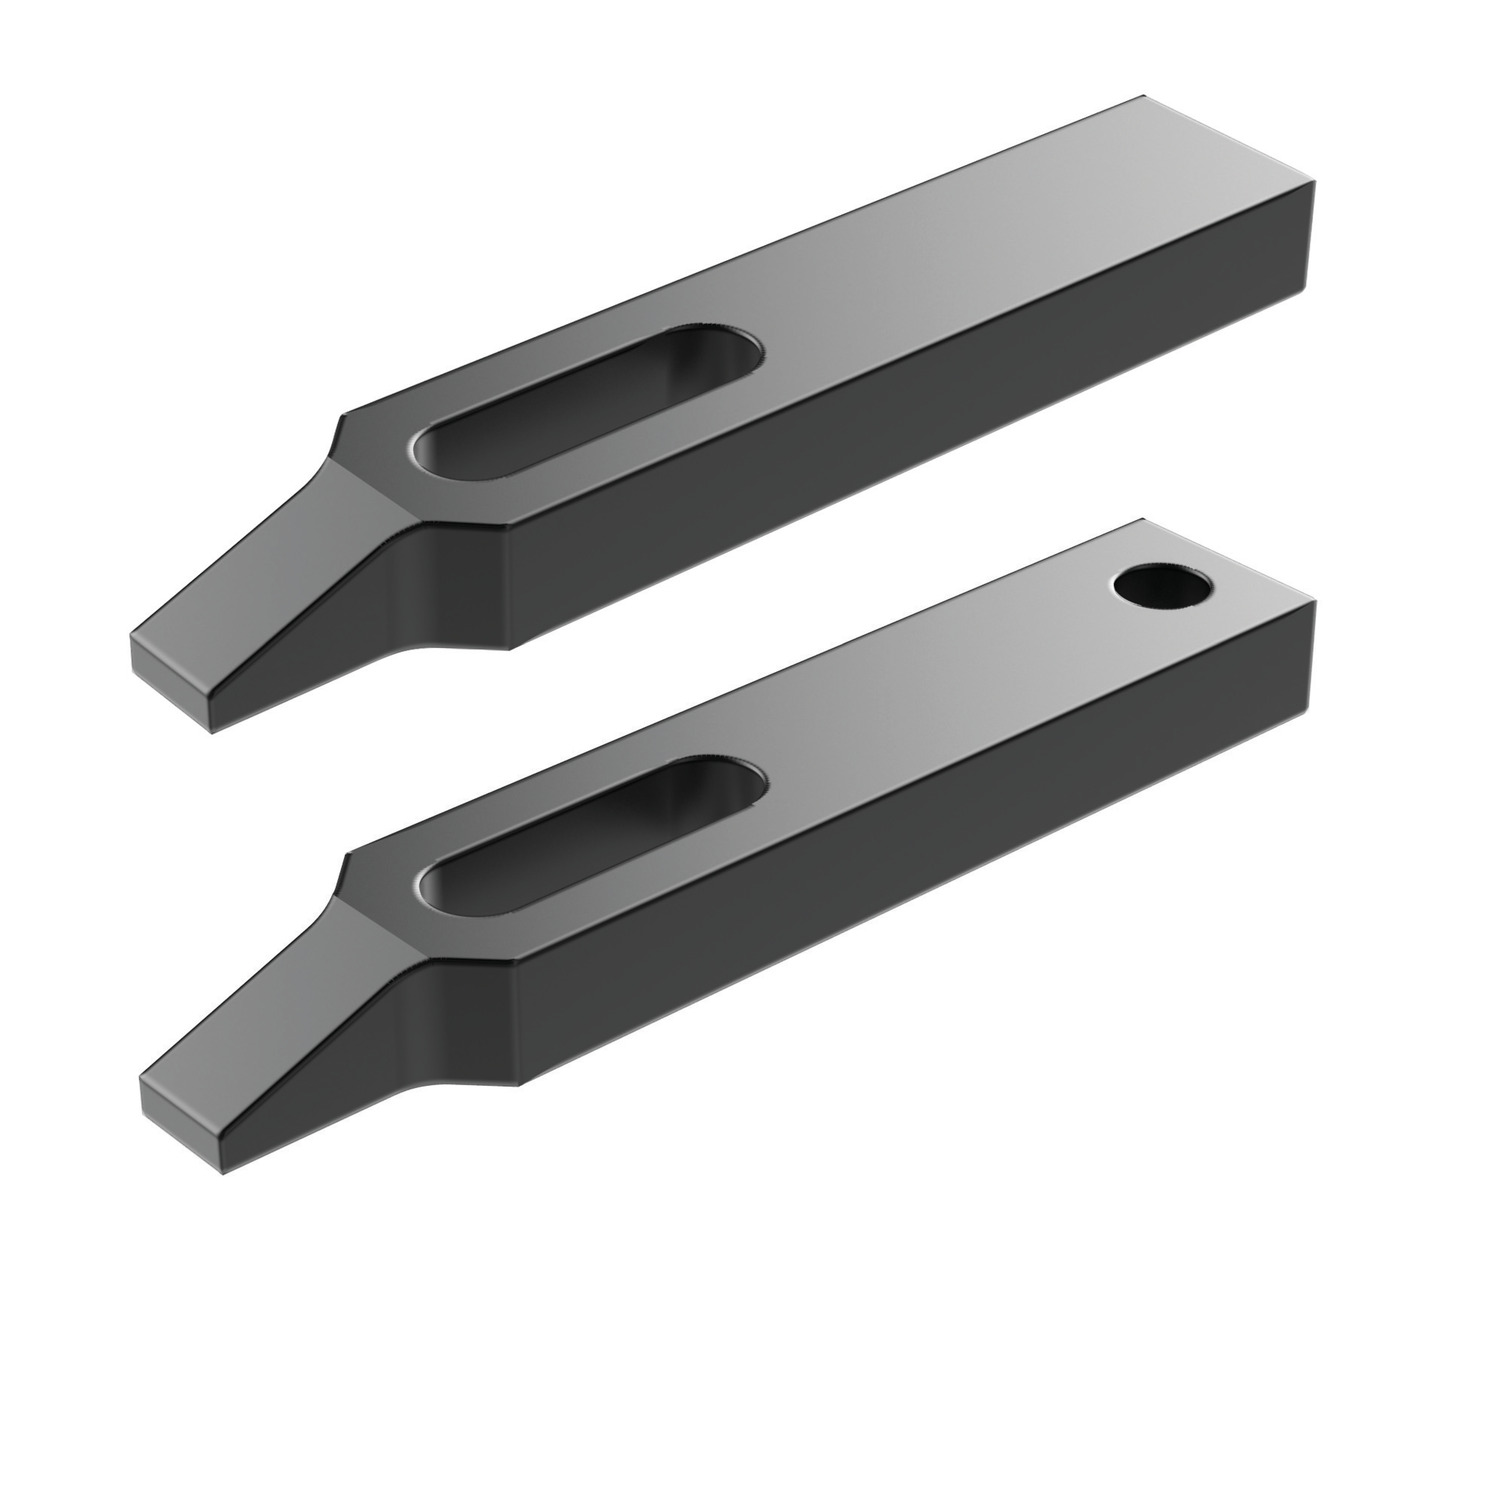 10160.W0207 Narrow Nose Clamps - Heat Treated Steel With Slot - 6,6 - 80 - 8